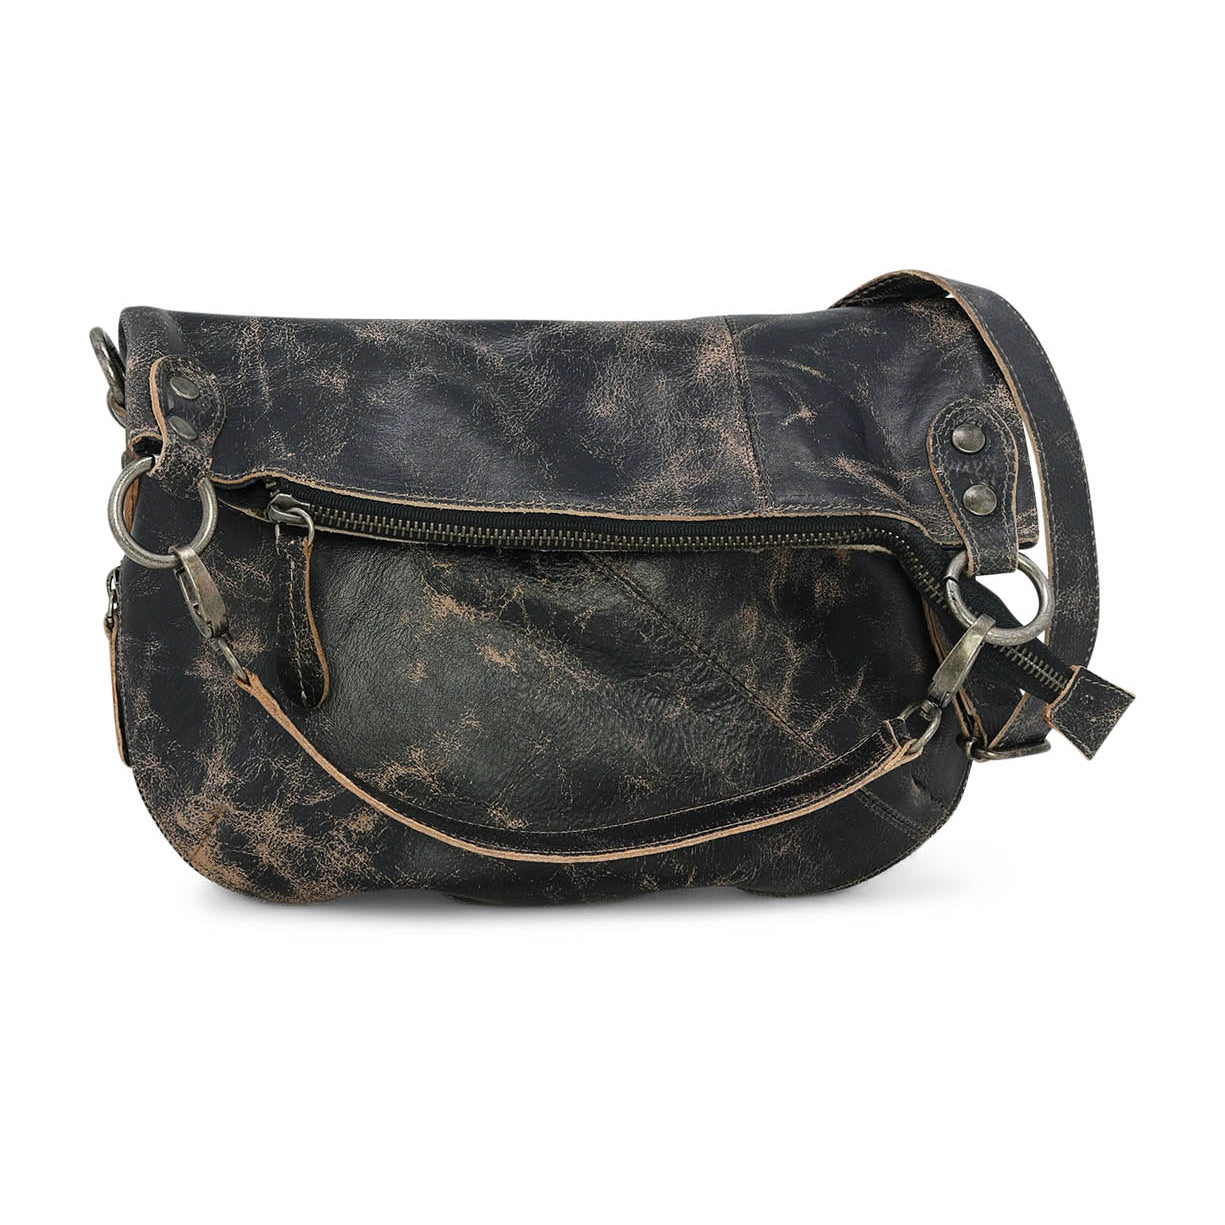 A black leather Tahiti crossbody bag with a zipper by Bed Stu.